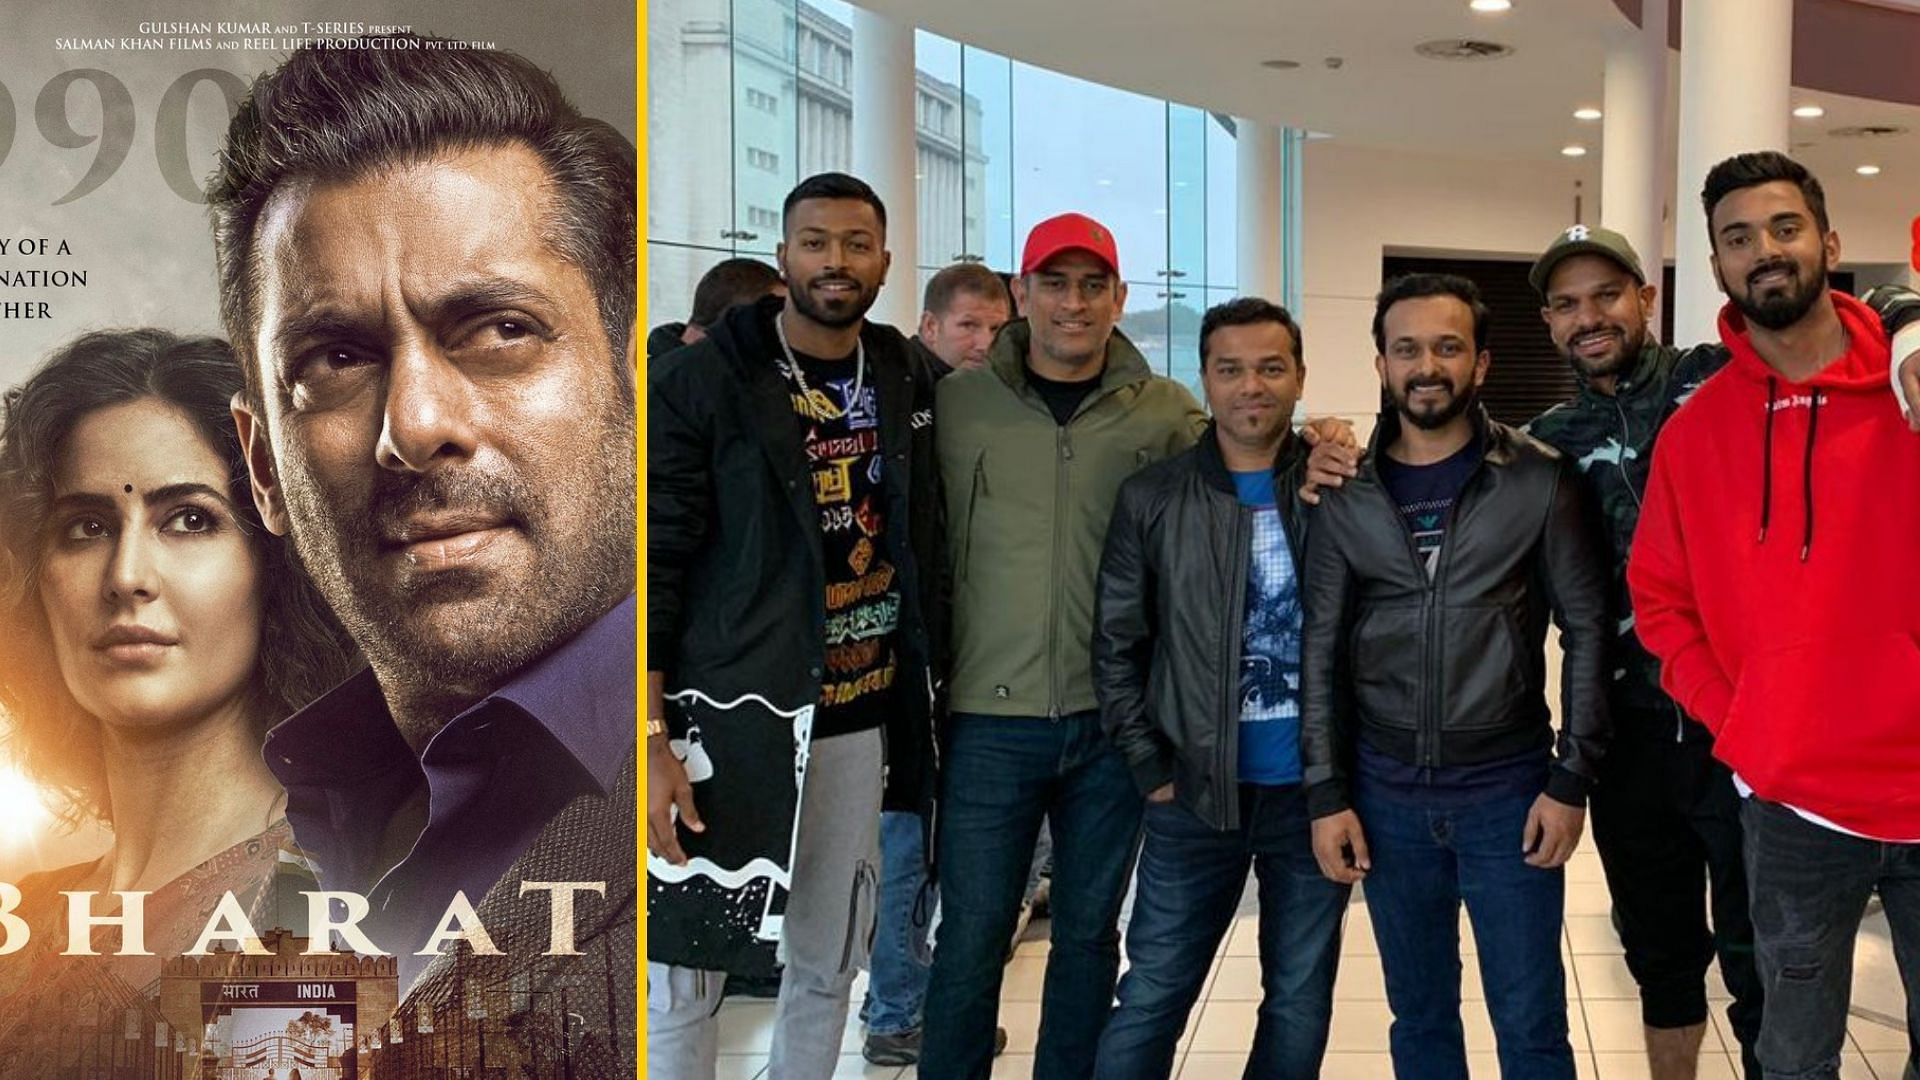 Members of the Indian cricket team took a break from the 2019 Cricket World Cup to watch <i>Bharat</i>.